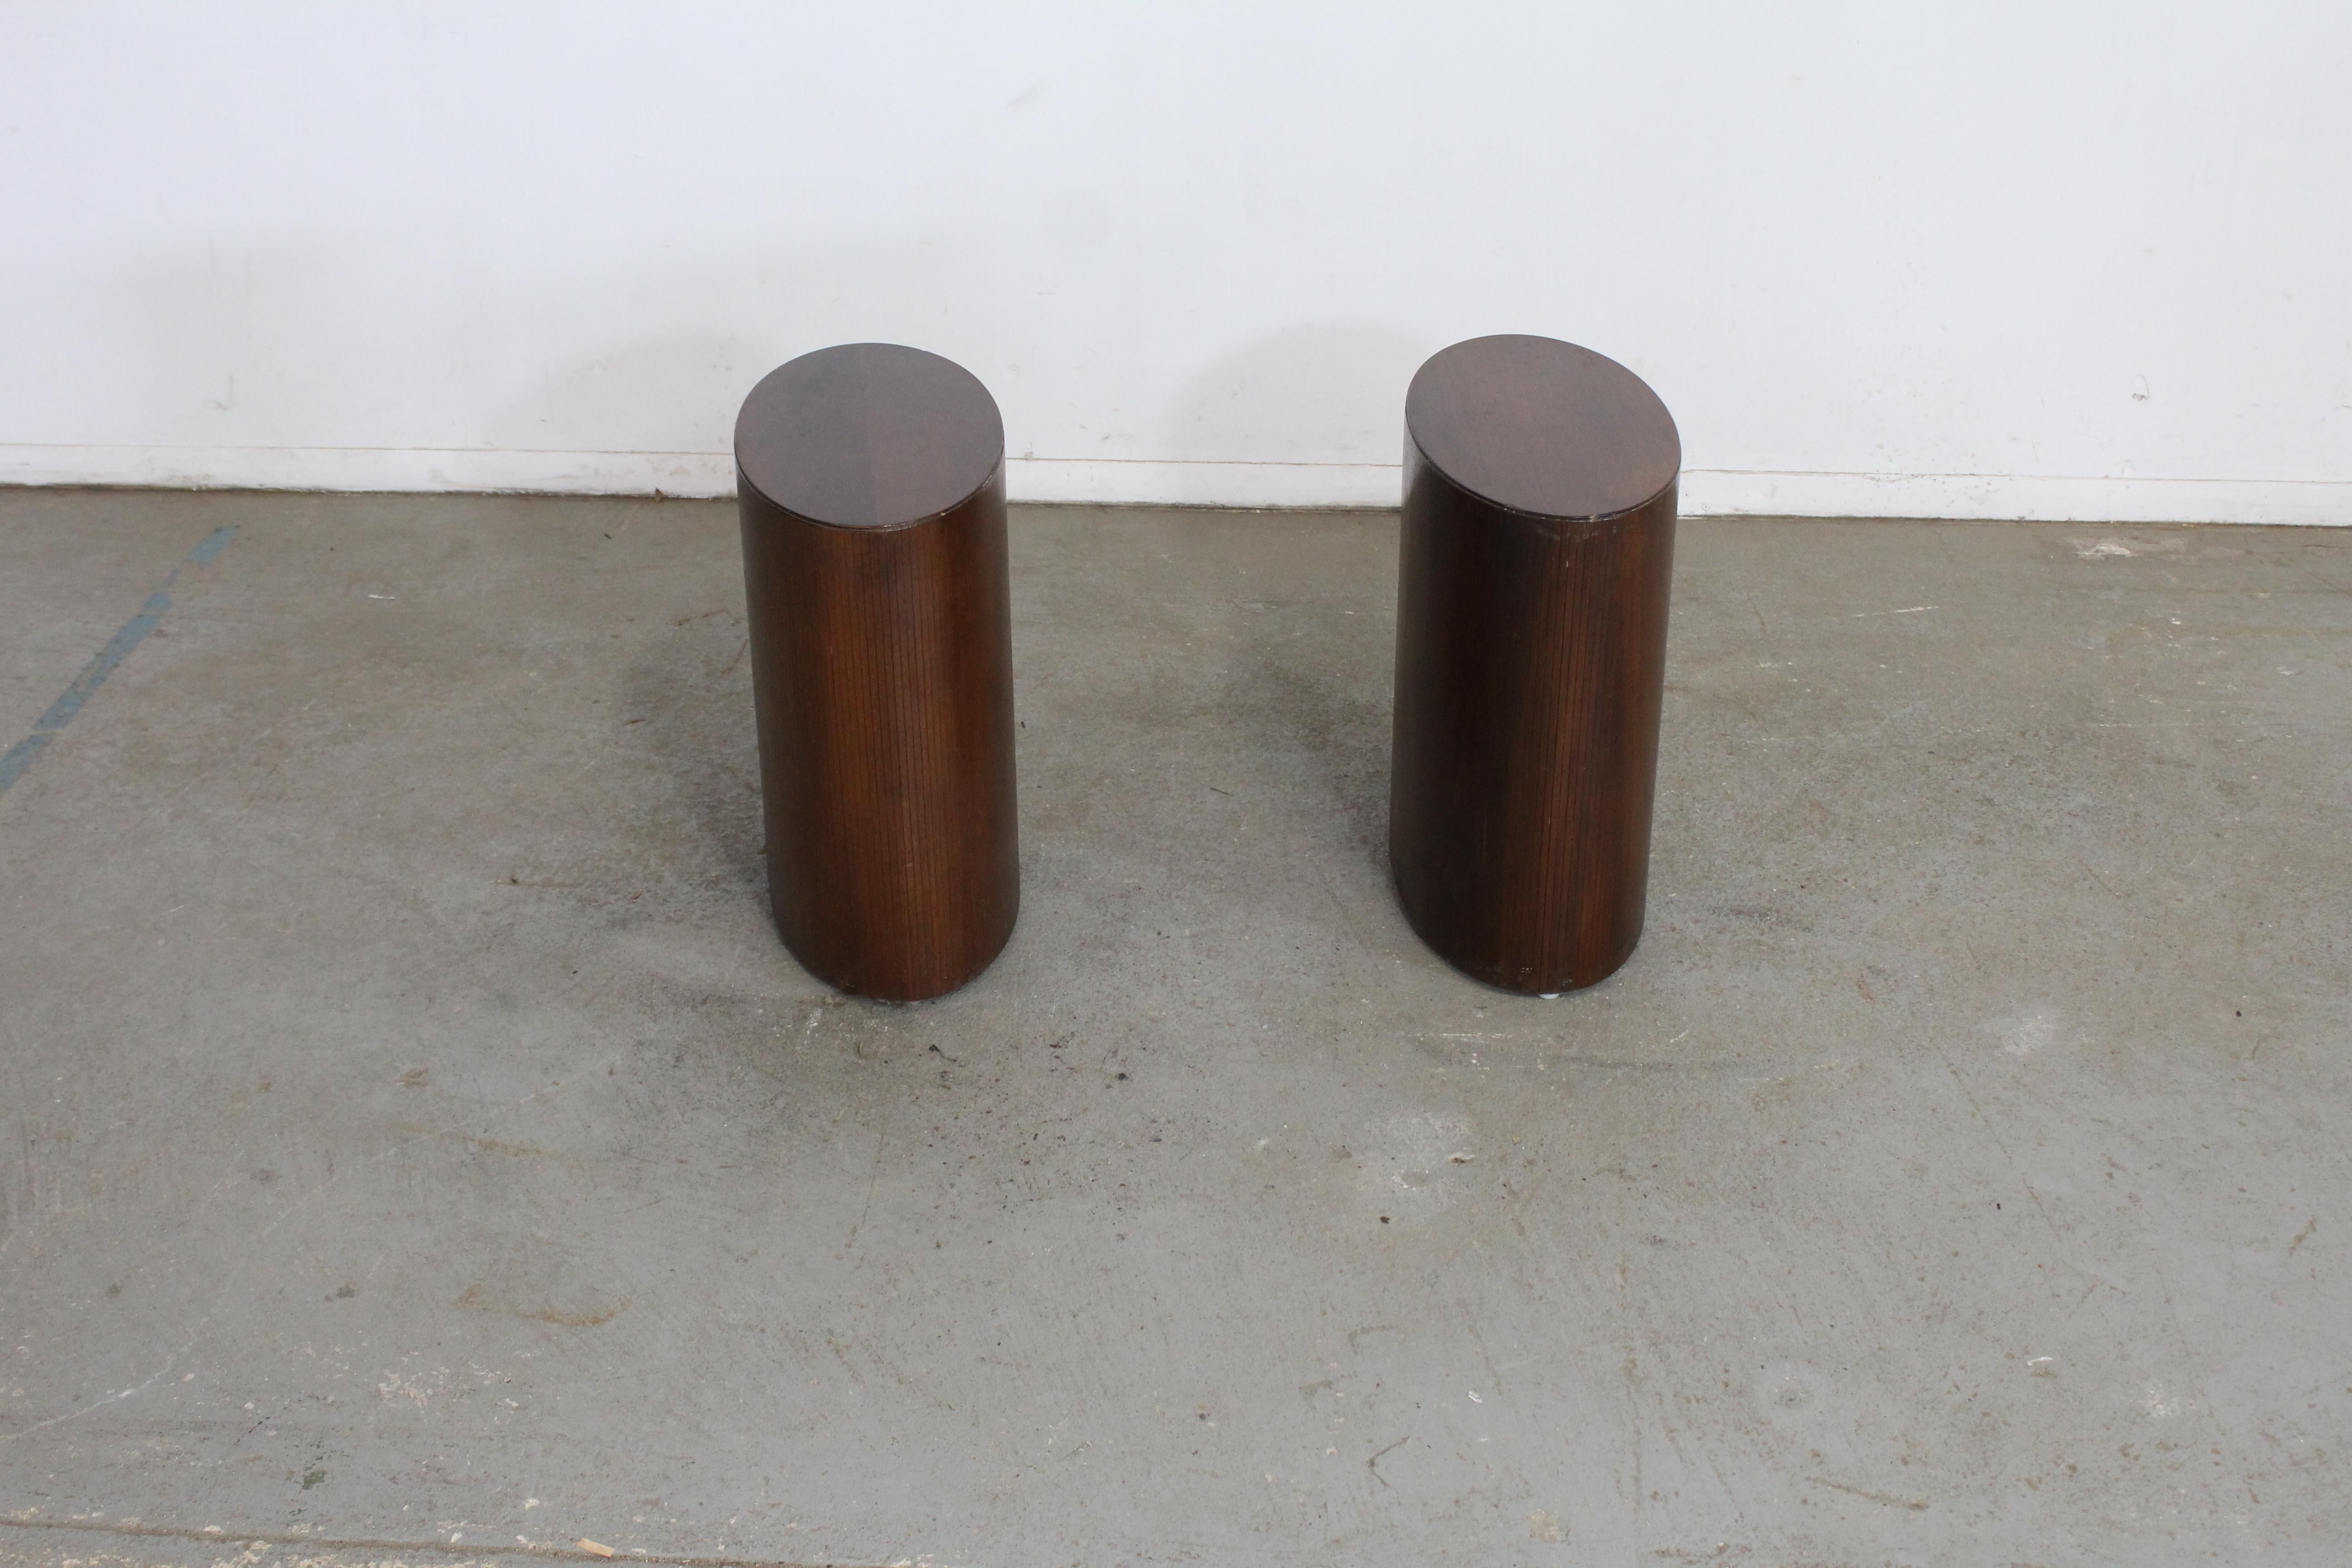 Pair of Mid-Century Modern Oval Walnut Pedestal/Stands/End Table by Lane

Offered is a beautiful pair of Mid-Century Modern Walnut pedestal/stands. The set is highly unique. The Oval shape helps offset the right angles of any décor. The wonderful